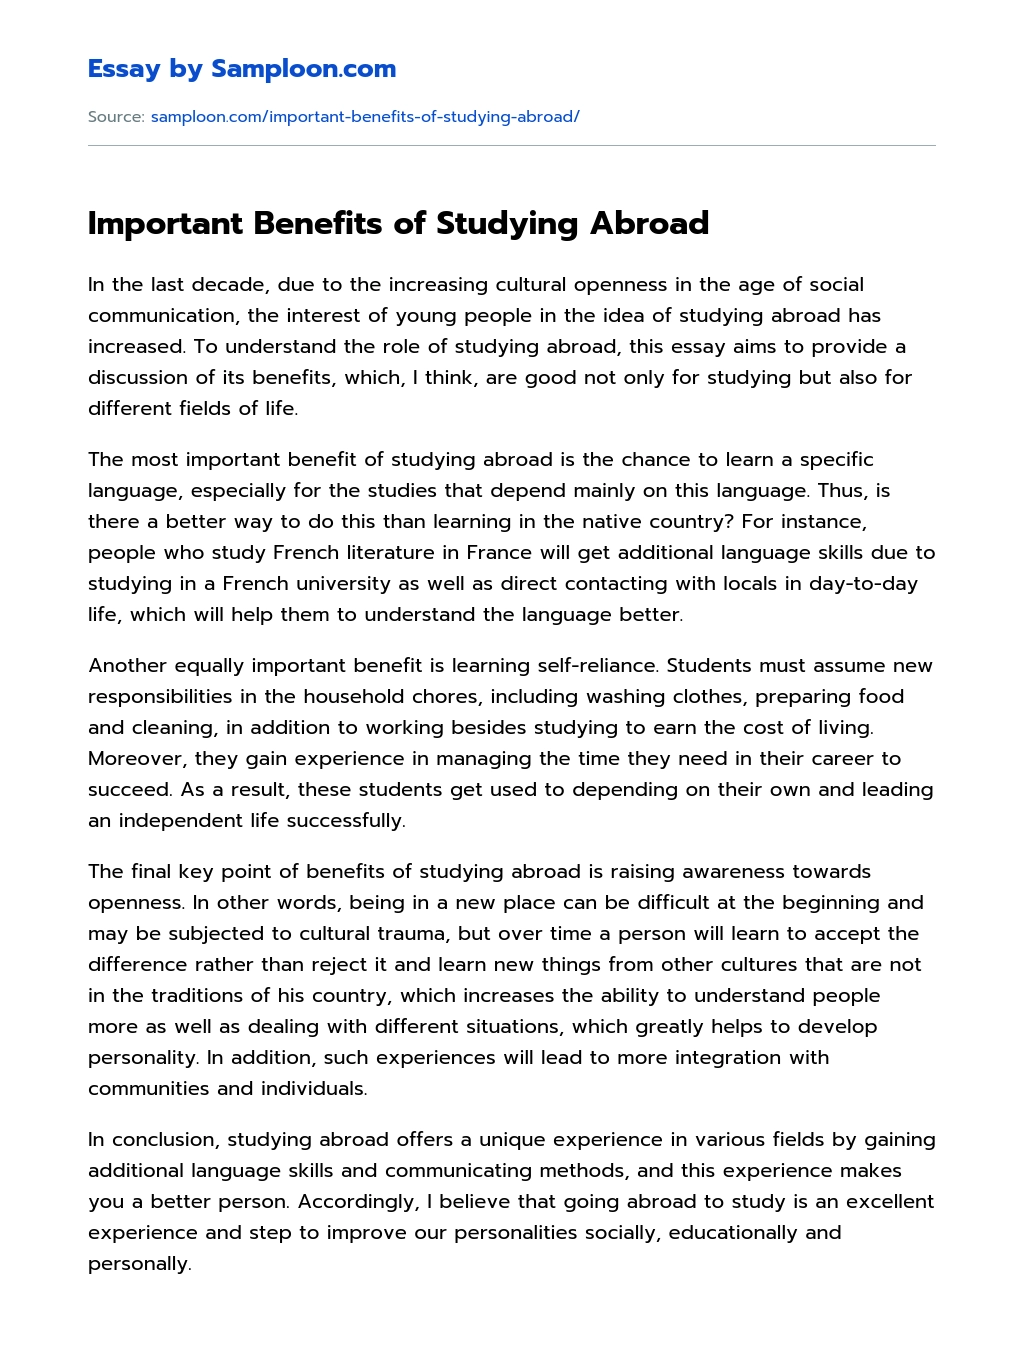 Important Benefits of Studying Abroad Application essay